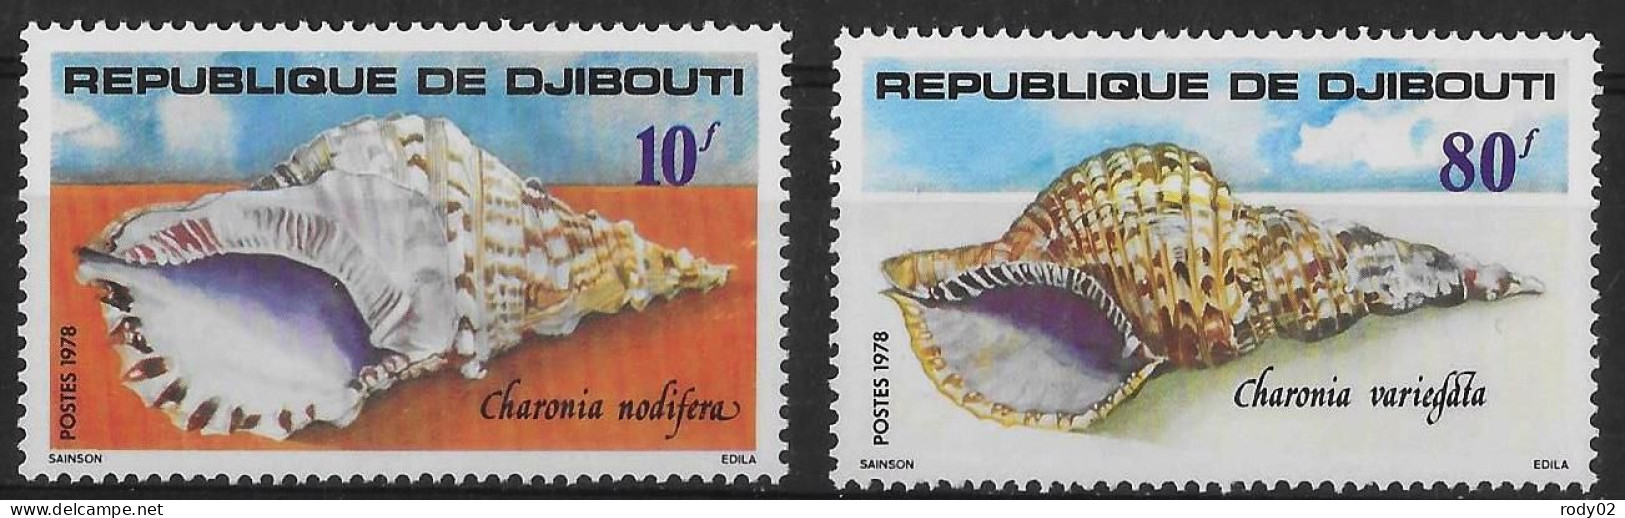 DJIBOUTI - COQUILLAGES - N° 486 ET 487 - NEUF** MNH - Conchiglie